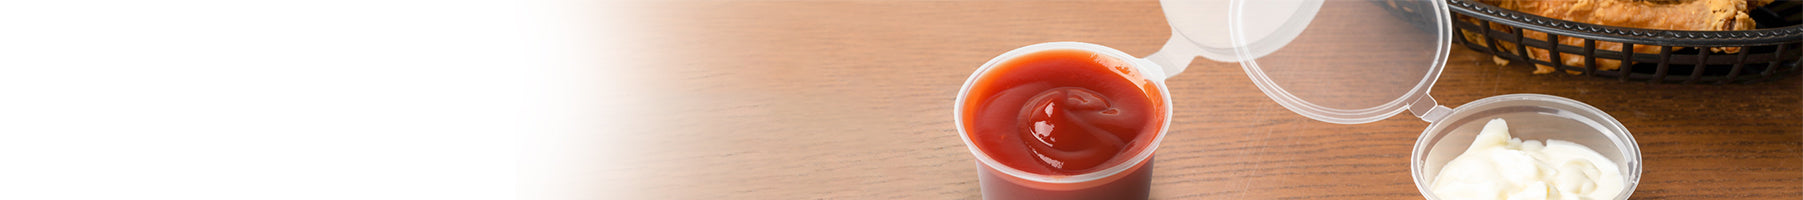 Banner_Smallwares_Food-Holding_Condiment-Cups_104